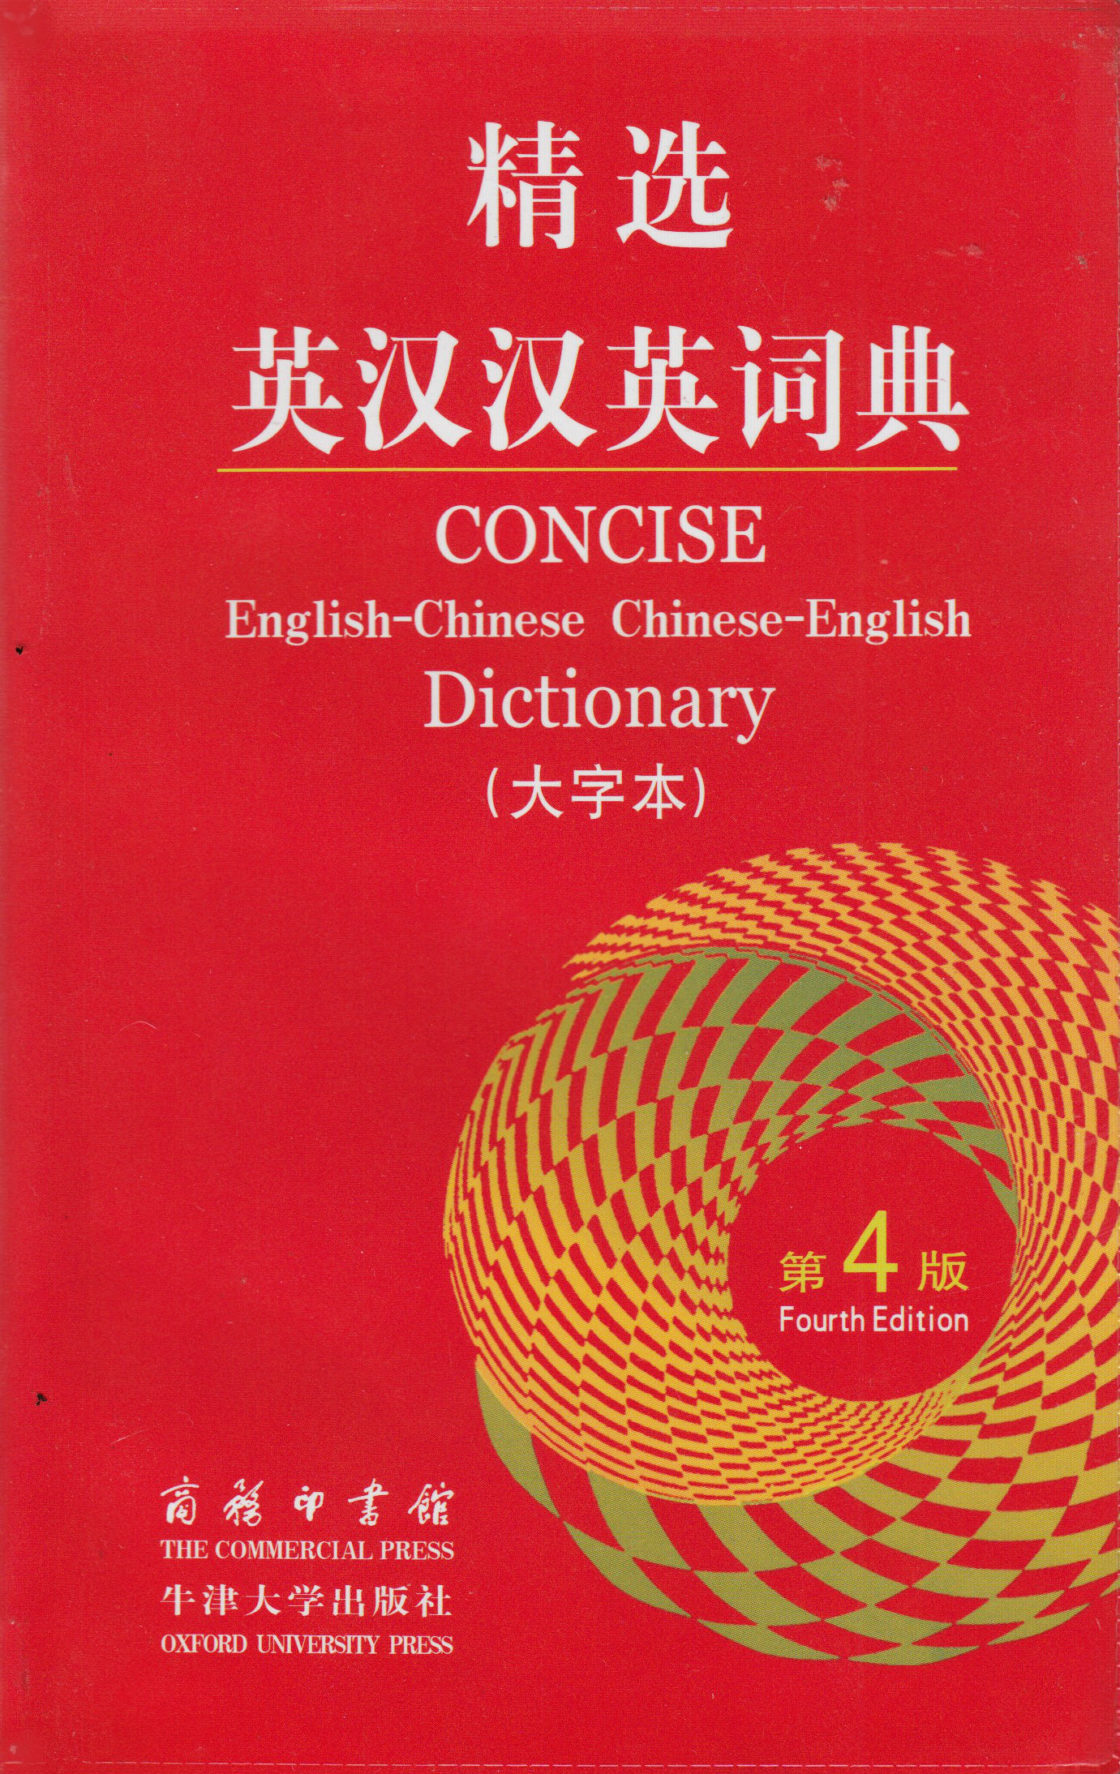 Concise English-Chinese Dictionary Large Print Ed. (Chinese